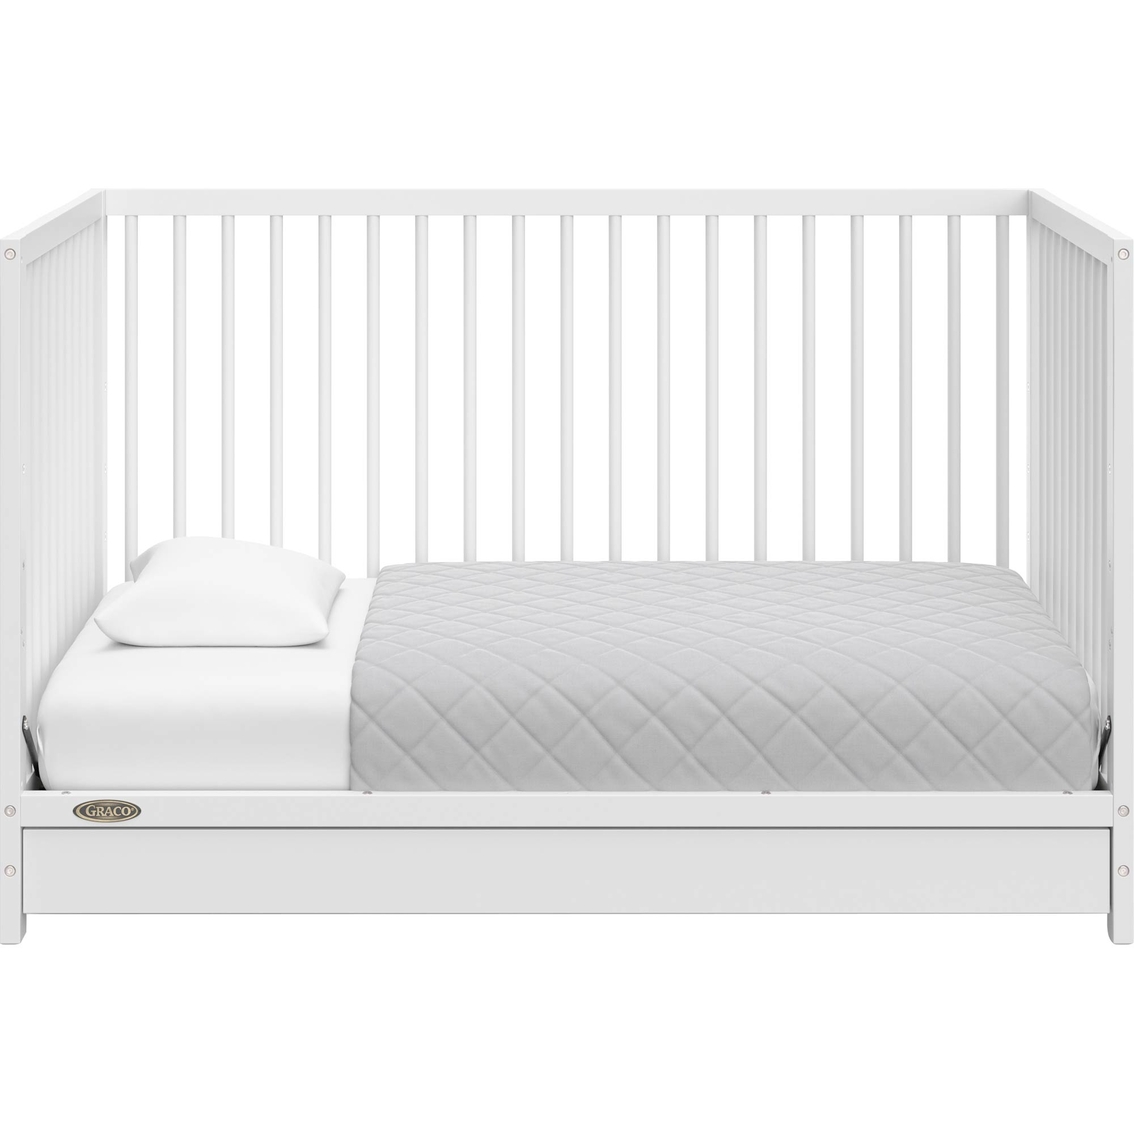 Graco Teddi 5 in 1 Convertible Crib with Drawer - Image 3 of 7